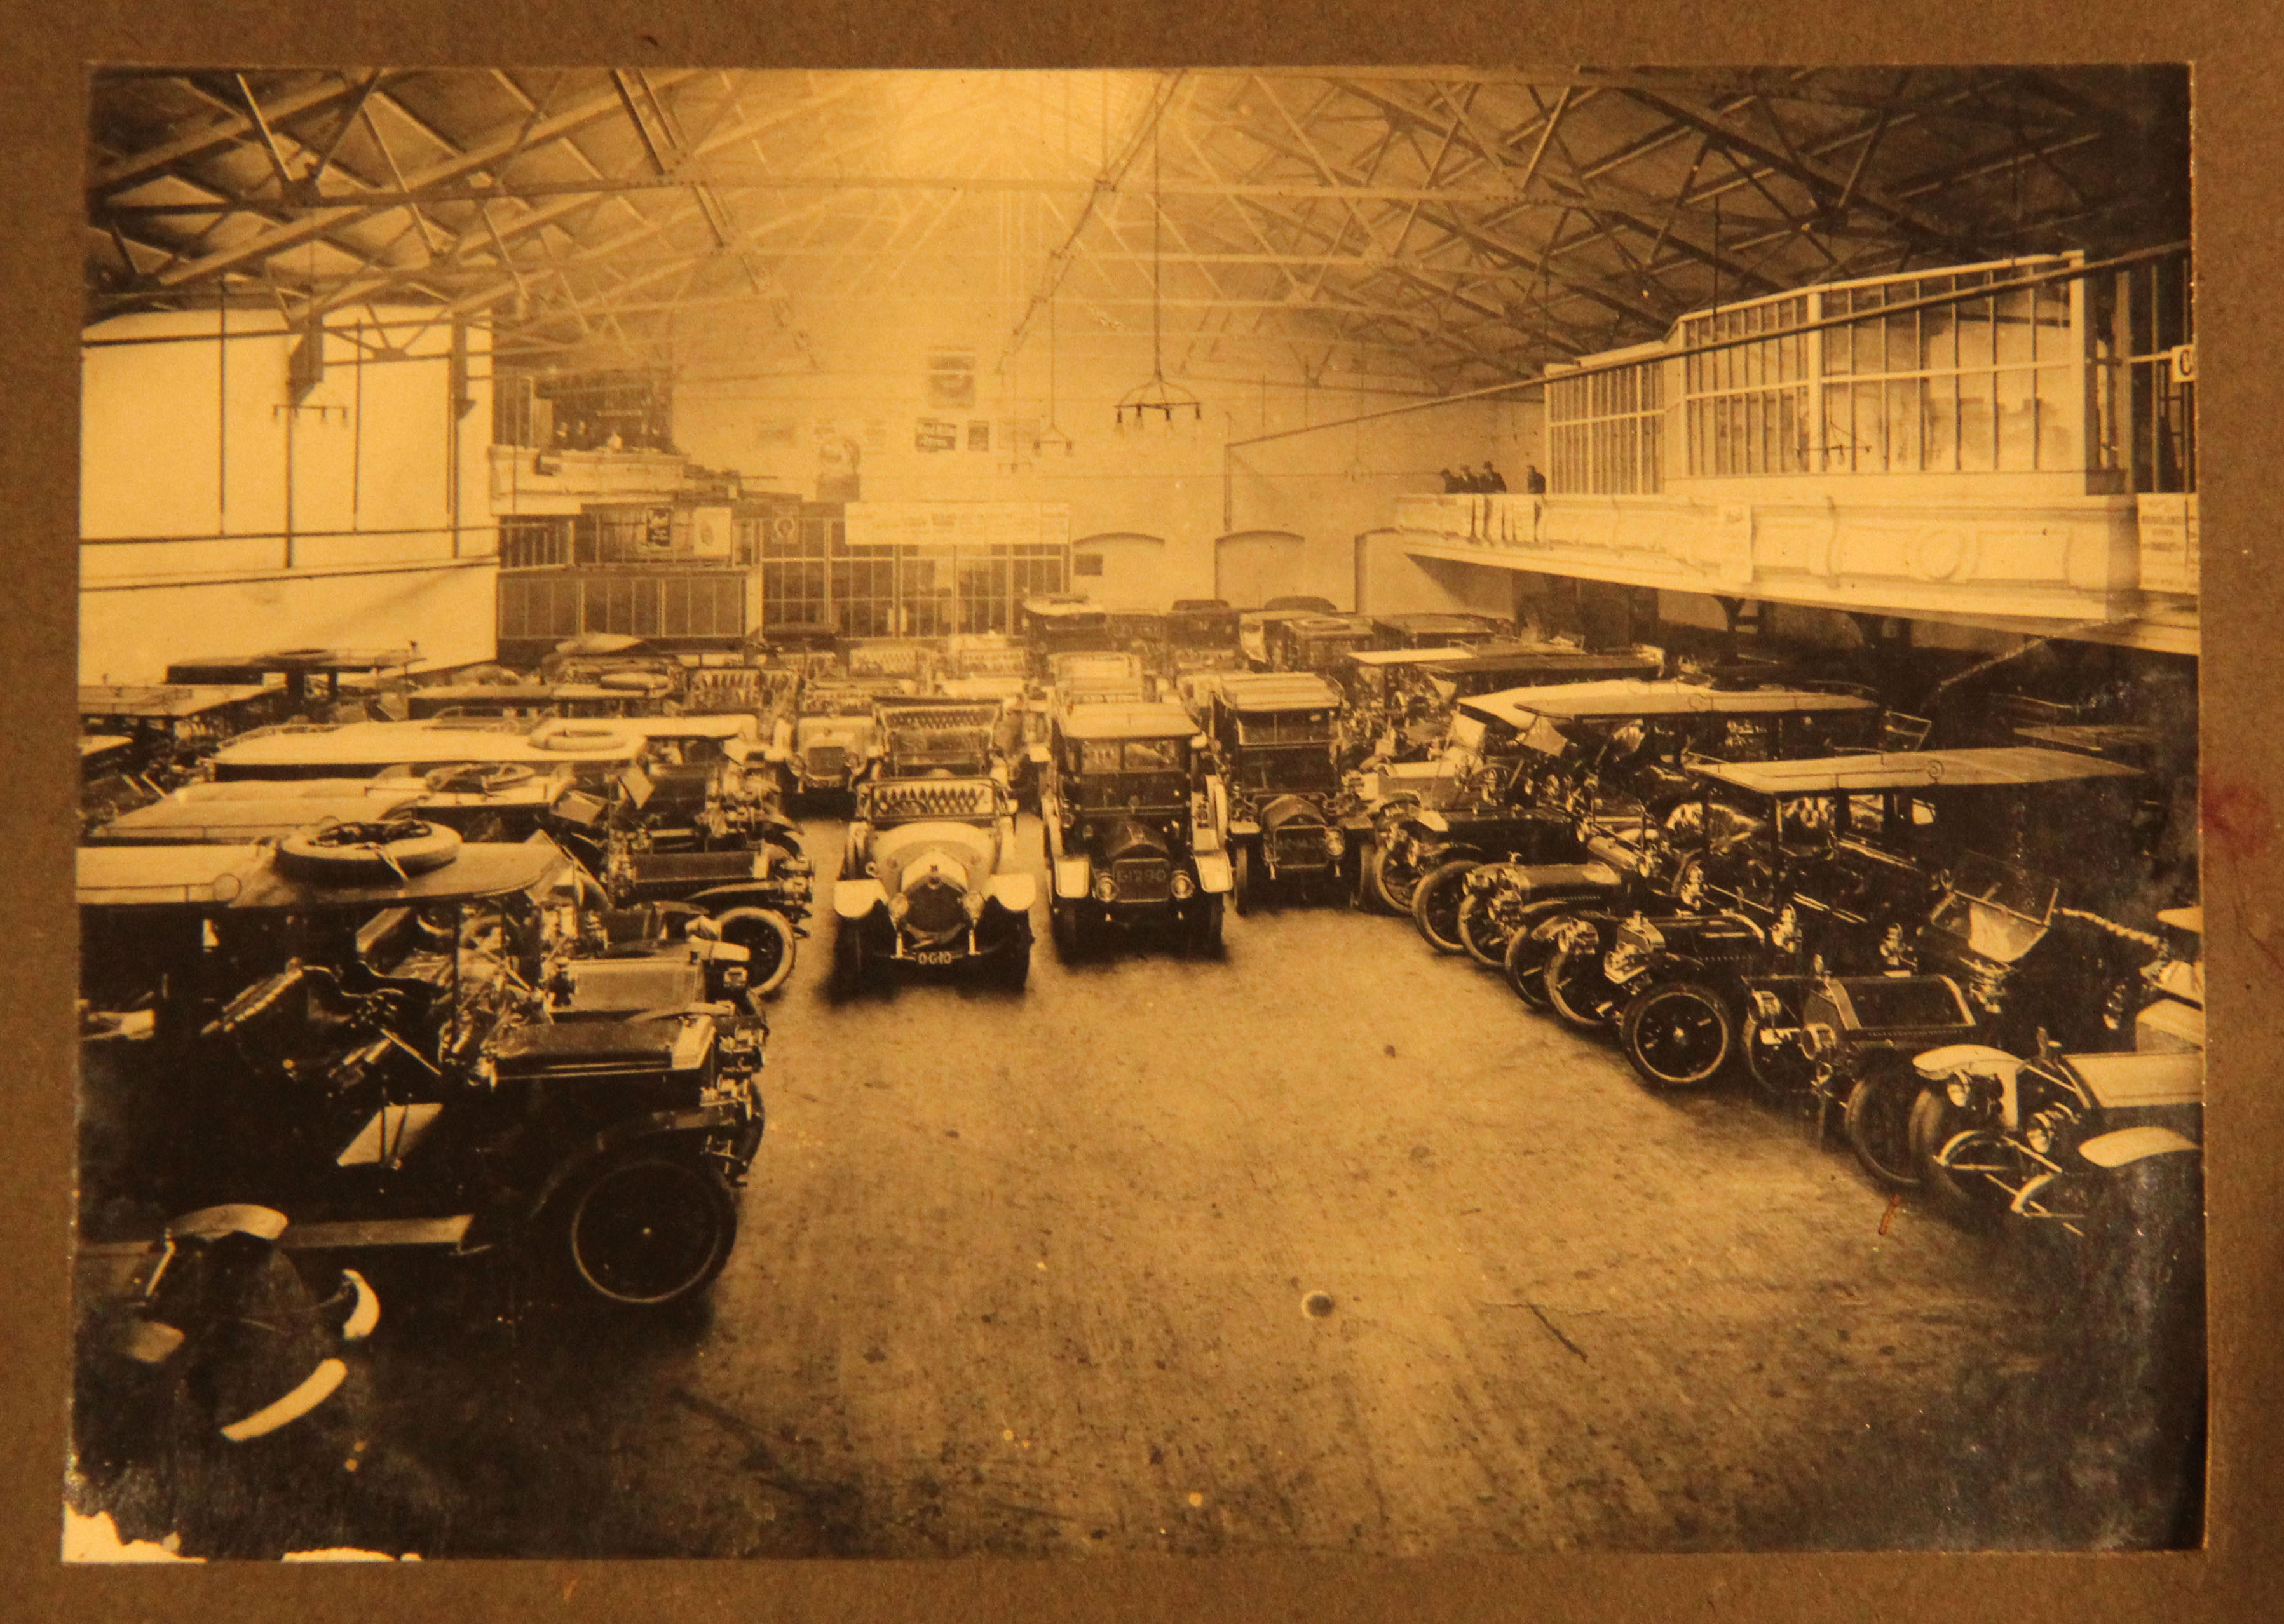 The Birmingham Garages Ltd. Authorised Dealers for Wolseley Cars. - Image 11 of 12